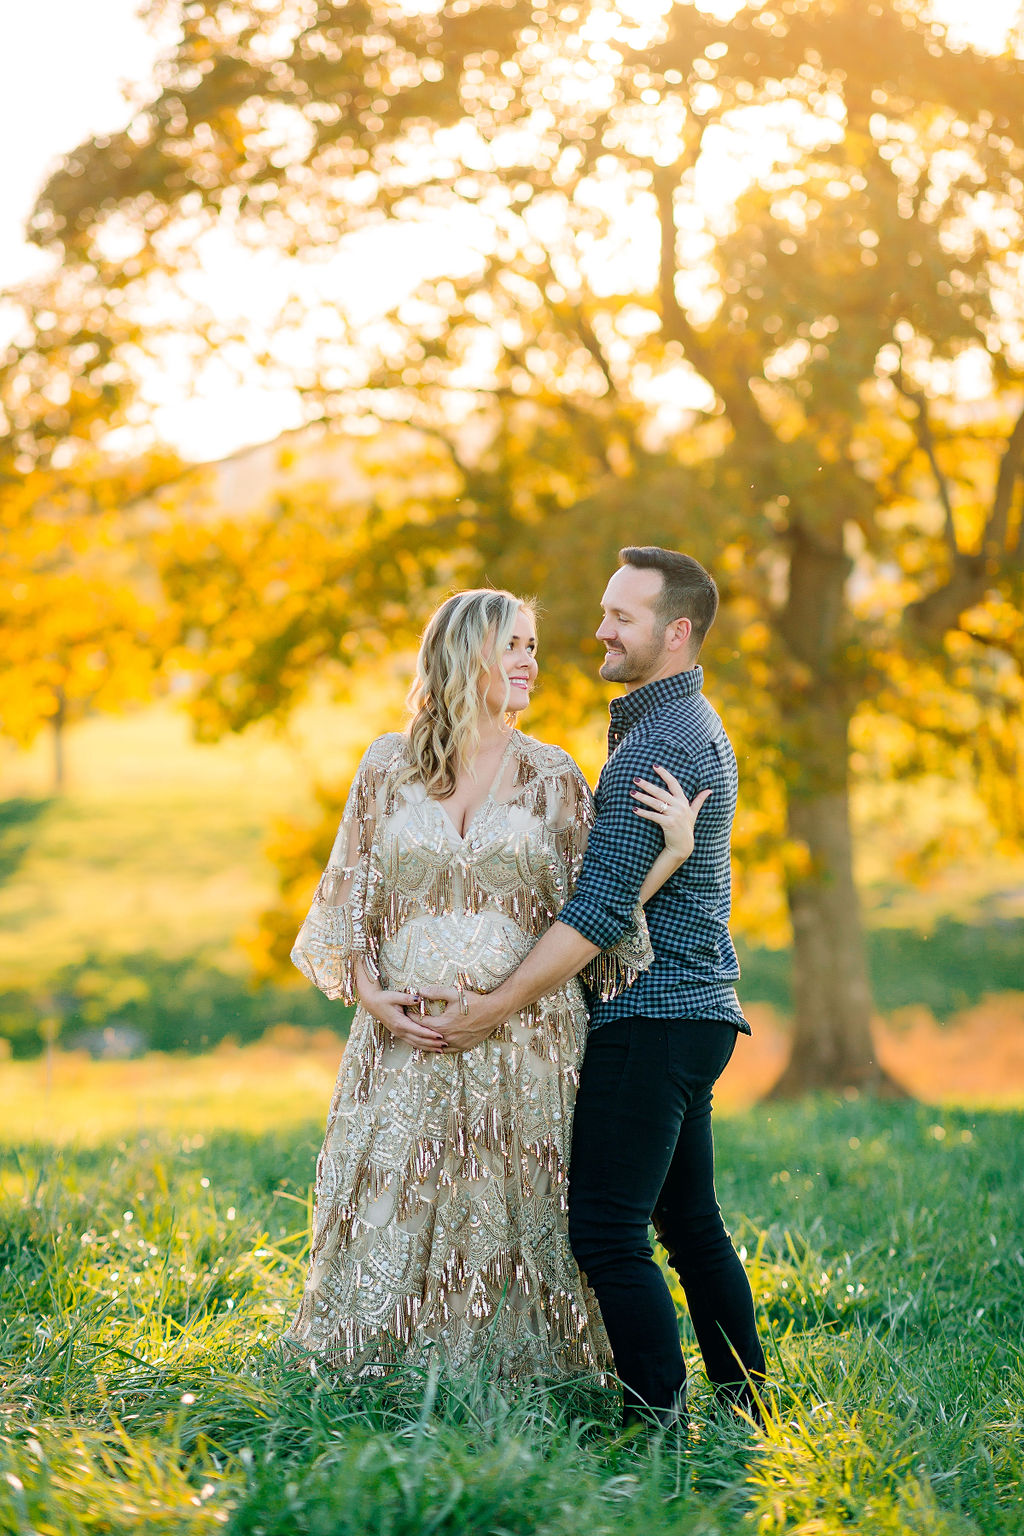 A mother to be stands in a grassy field in an ornate maternity gown with her partner putting his hand on the bump obgyn front royal va